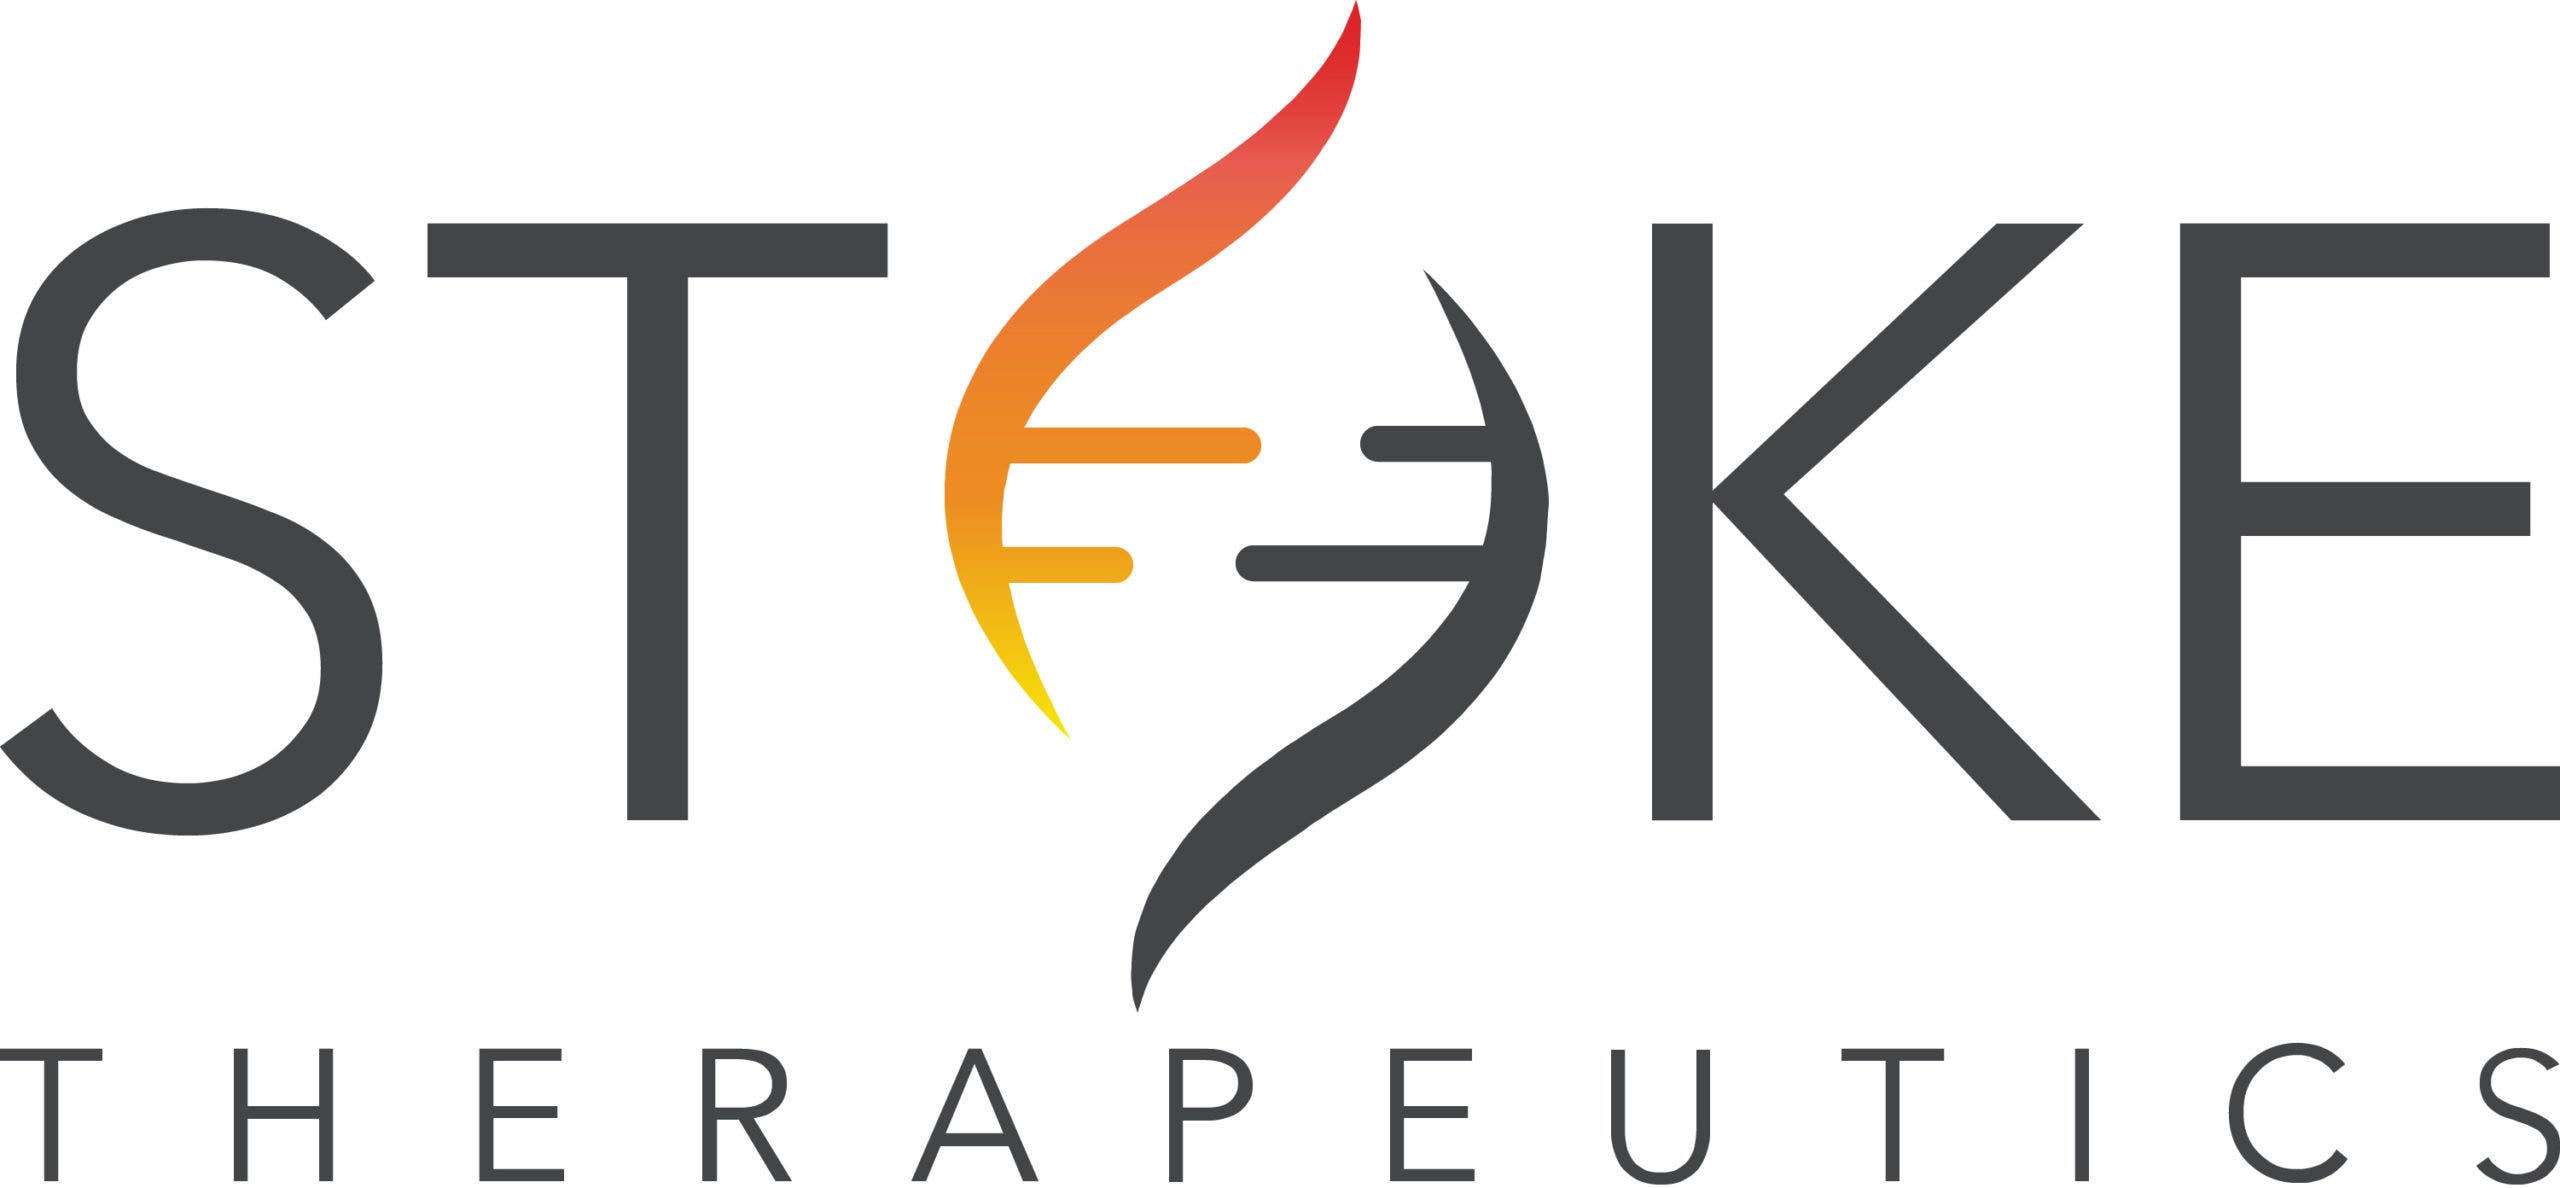 Stoke Therapeutics Stock Falls Post Early Efficacy Data From Lead Dravet Syndrome Program